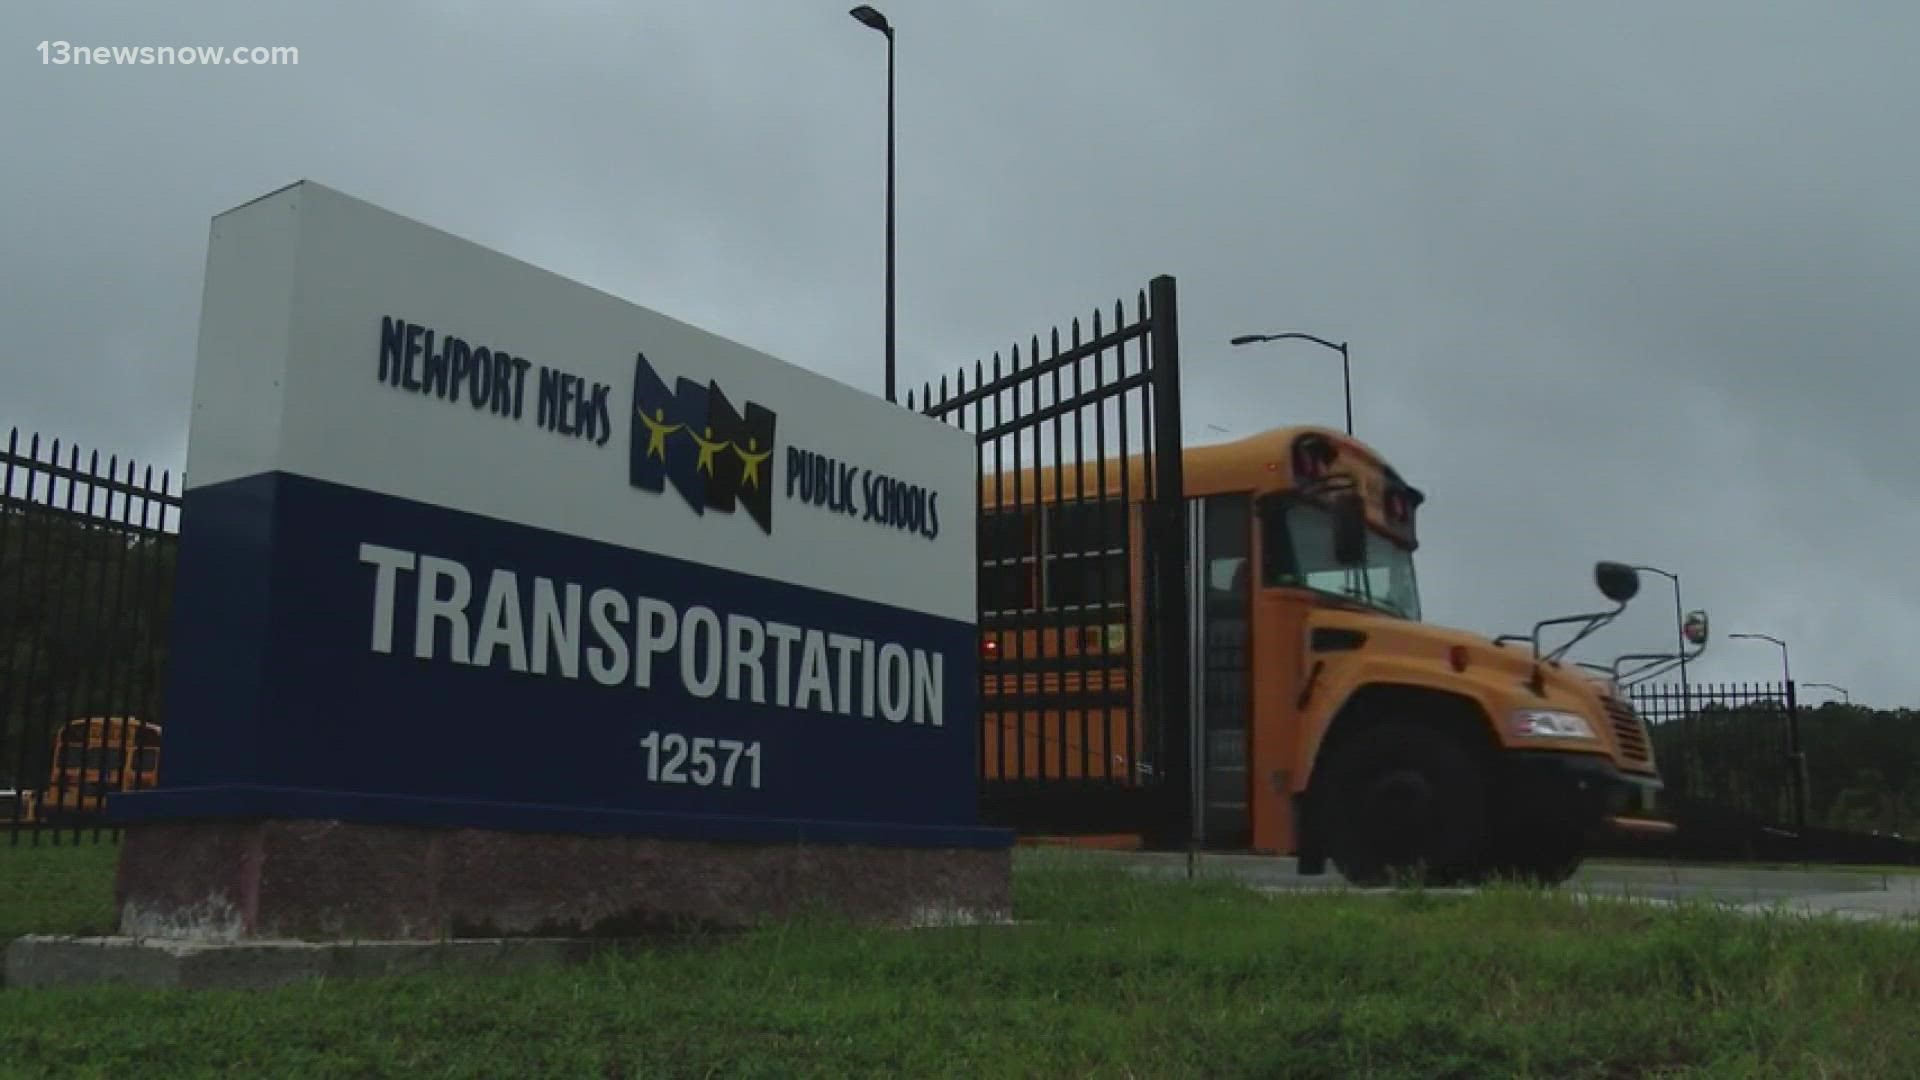 Newport News Public Schools is among school divisions that are dealing with logistics problems.